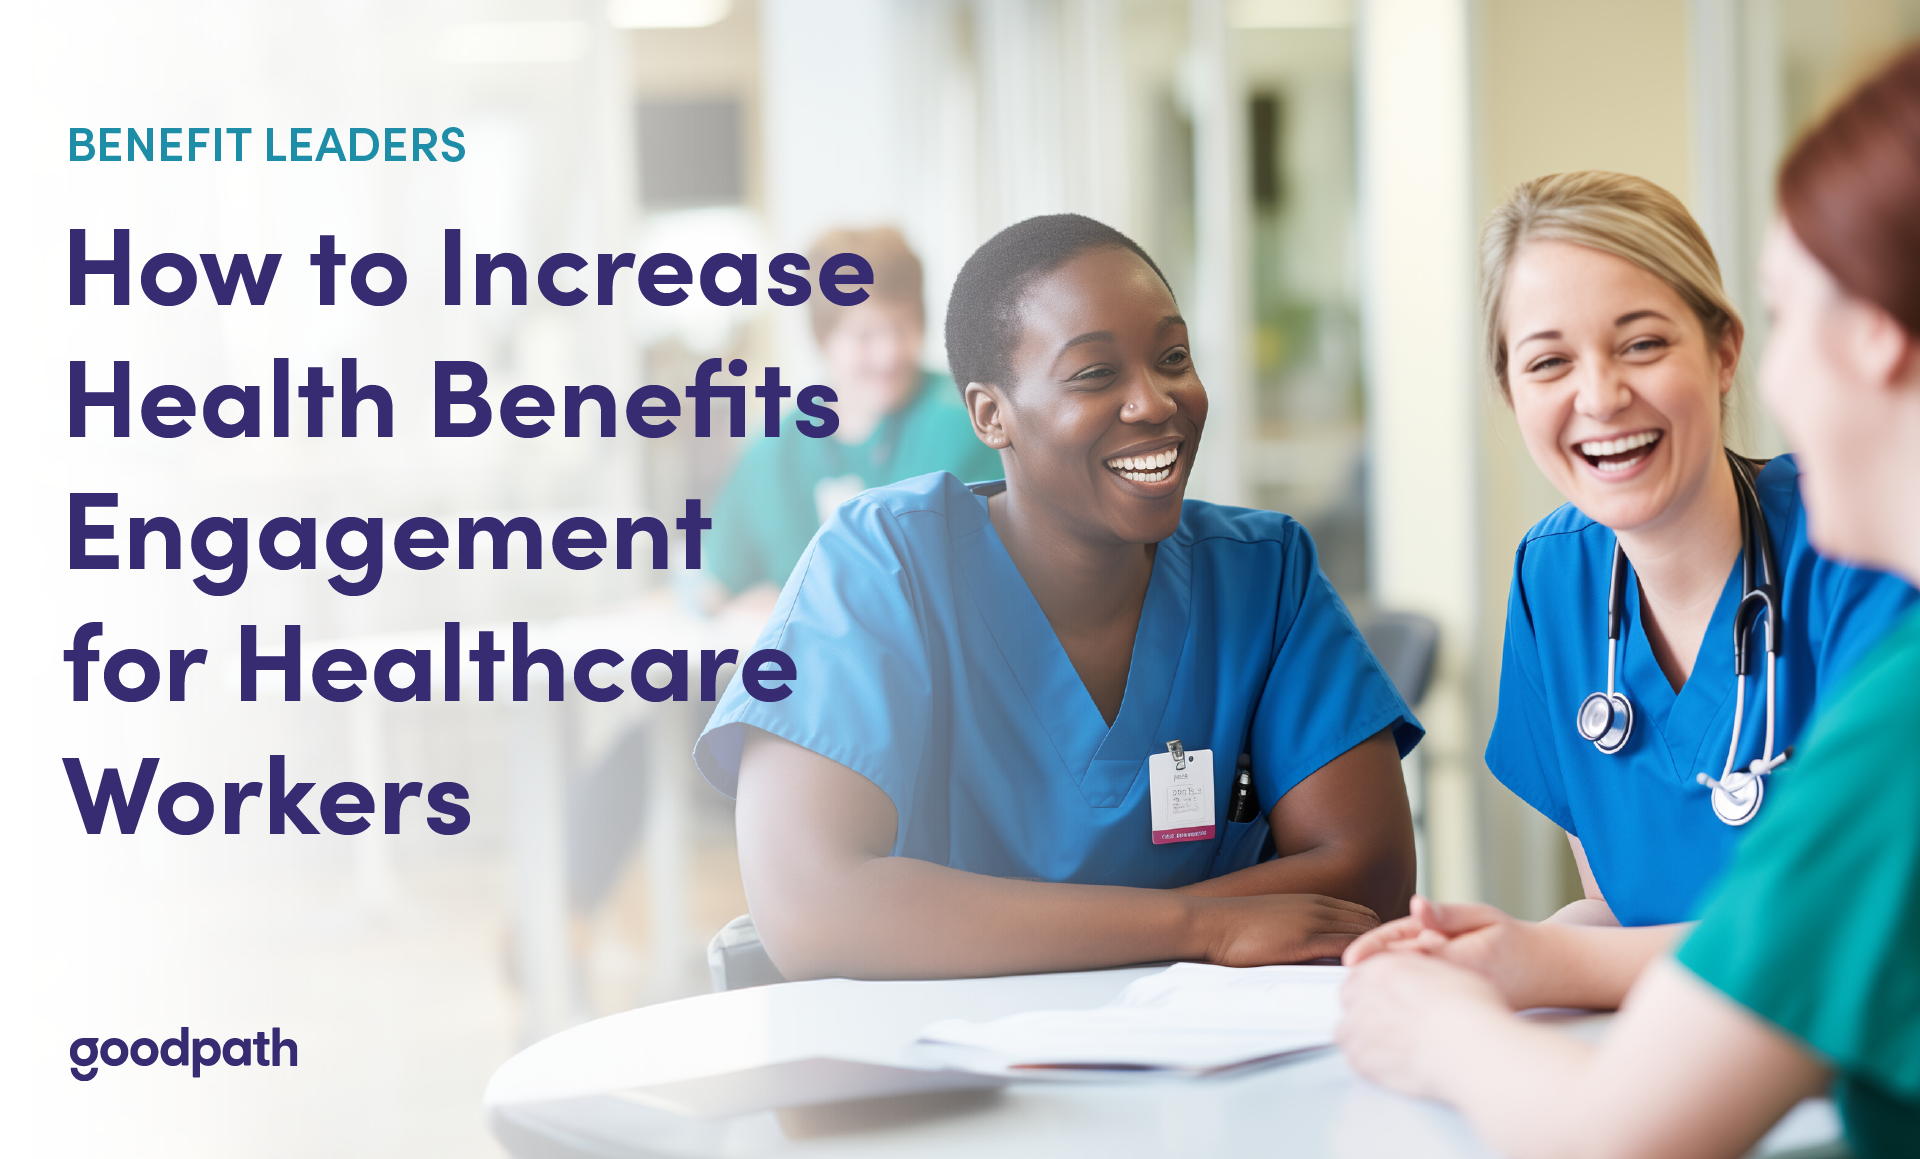 Benefit Leaders: How to Increase Health Benefits Engagement for Healthcare Workers